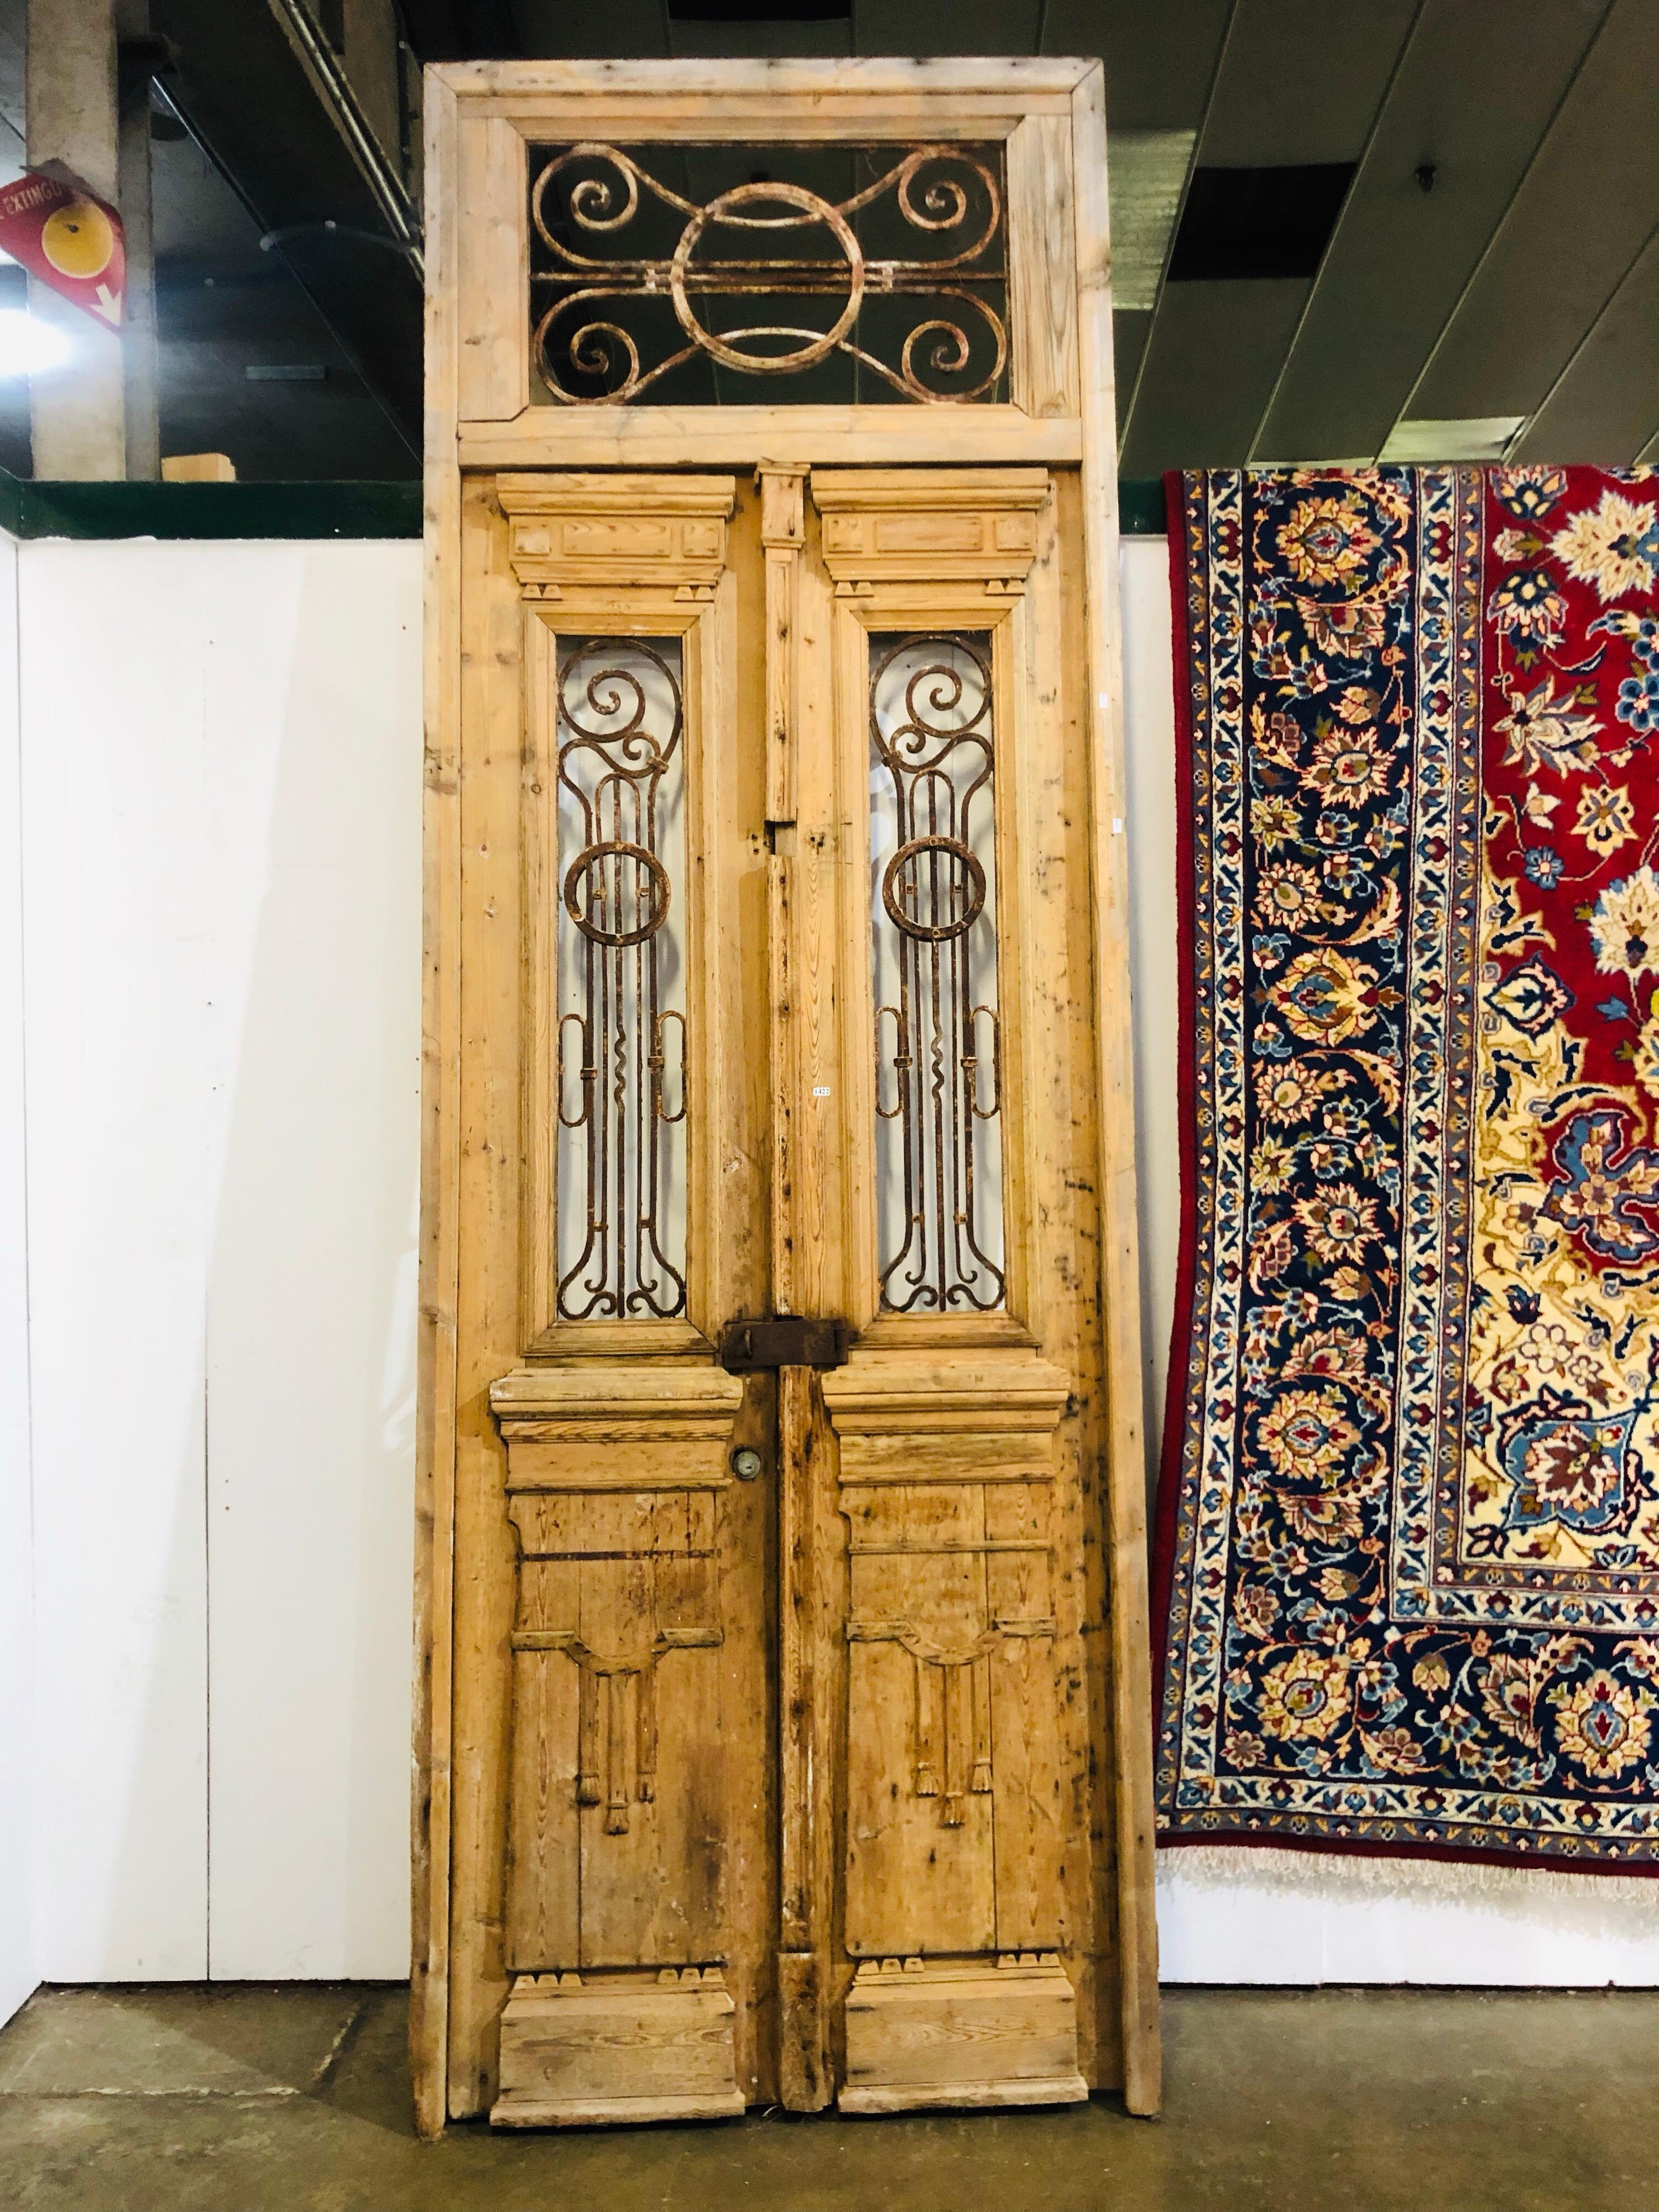 Architectural wrought iron and pine French doors
Measures: 310cm total height
245cm high to top of doors
118cm wide 7cm deep.